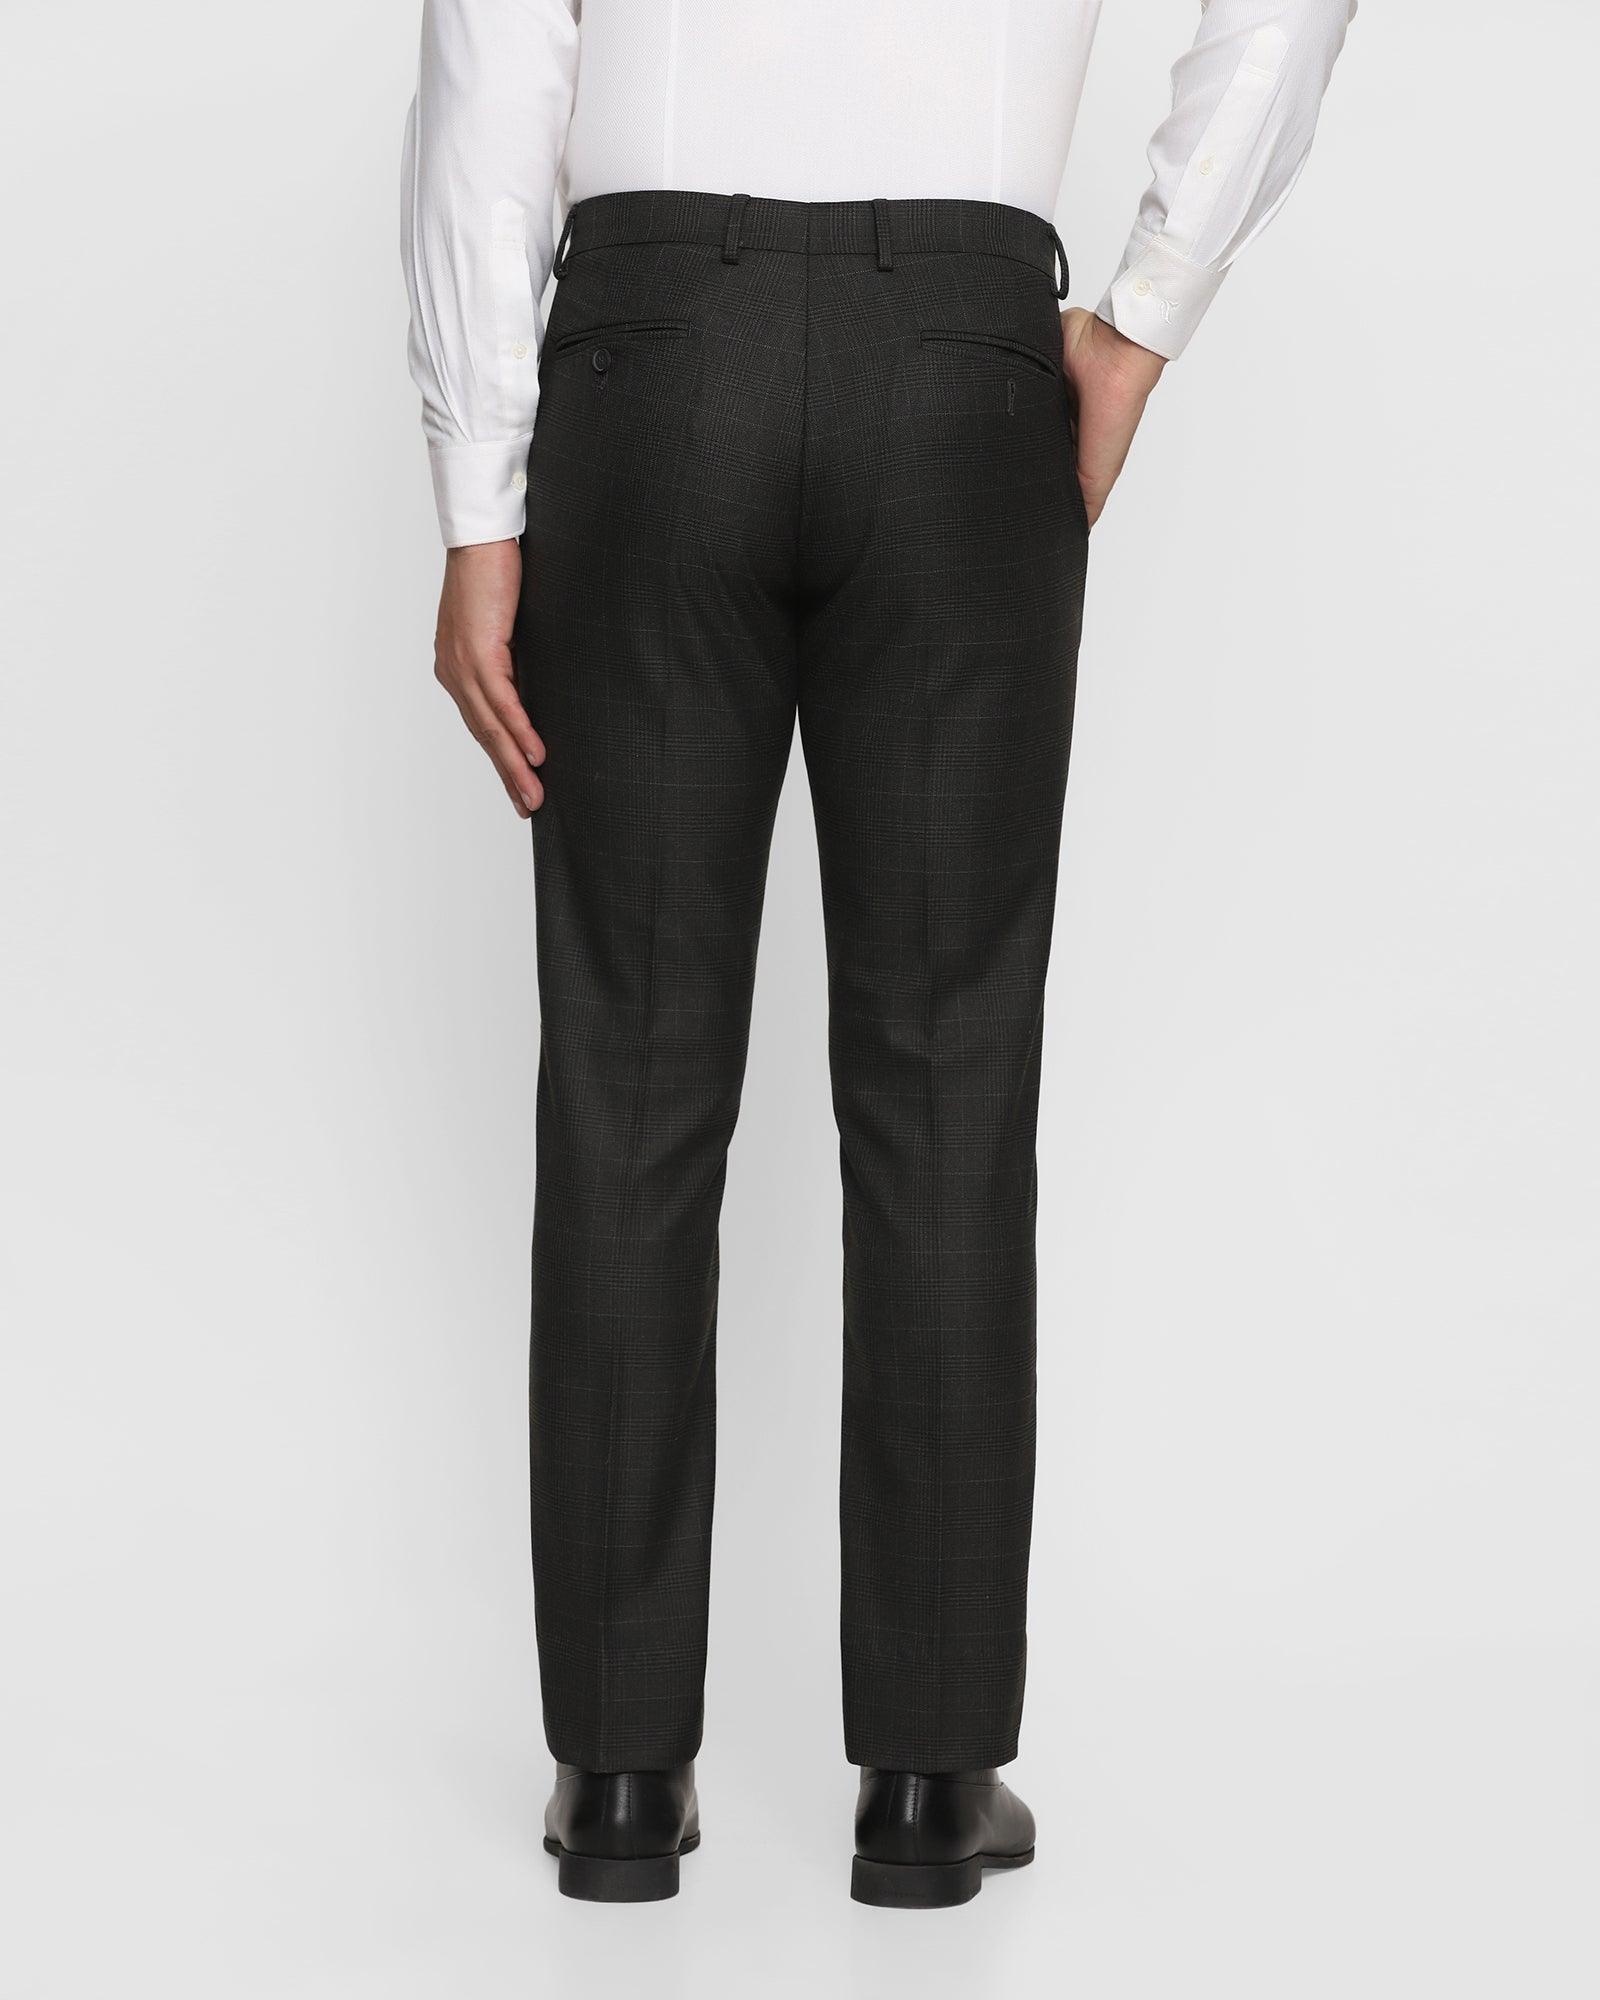 Buy La Collection Men Formal Trouser Charcoal (40) Online - Shop Fashion,  Accessories & Luggage on Carrefour Saudi Arabia